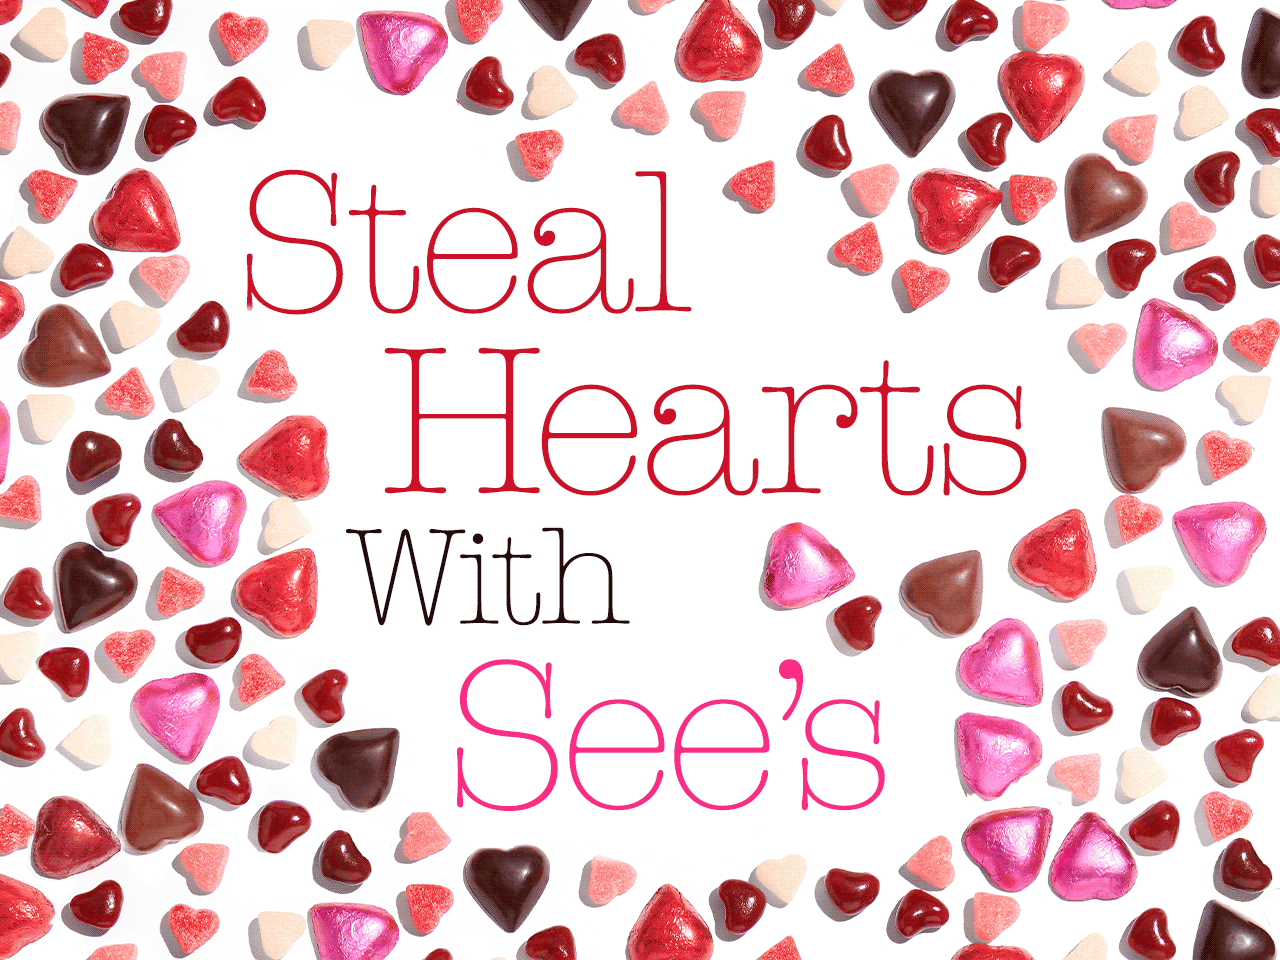 Steal Hearts With See’s